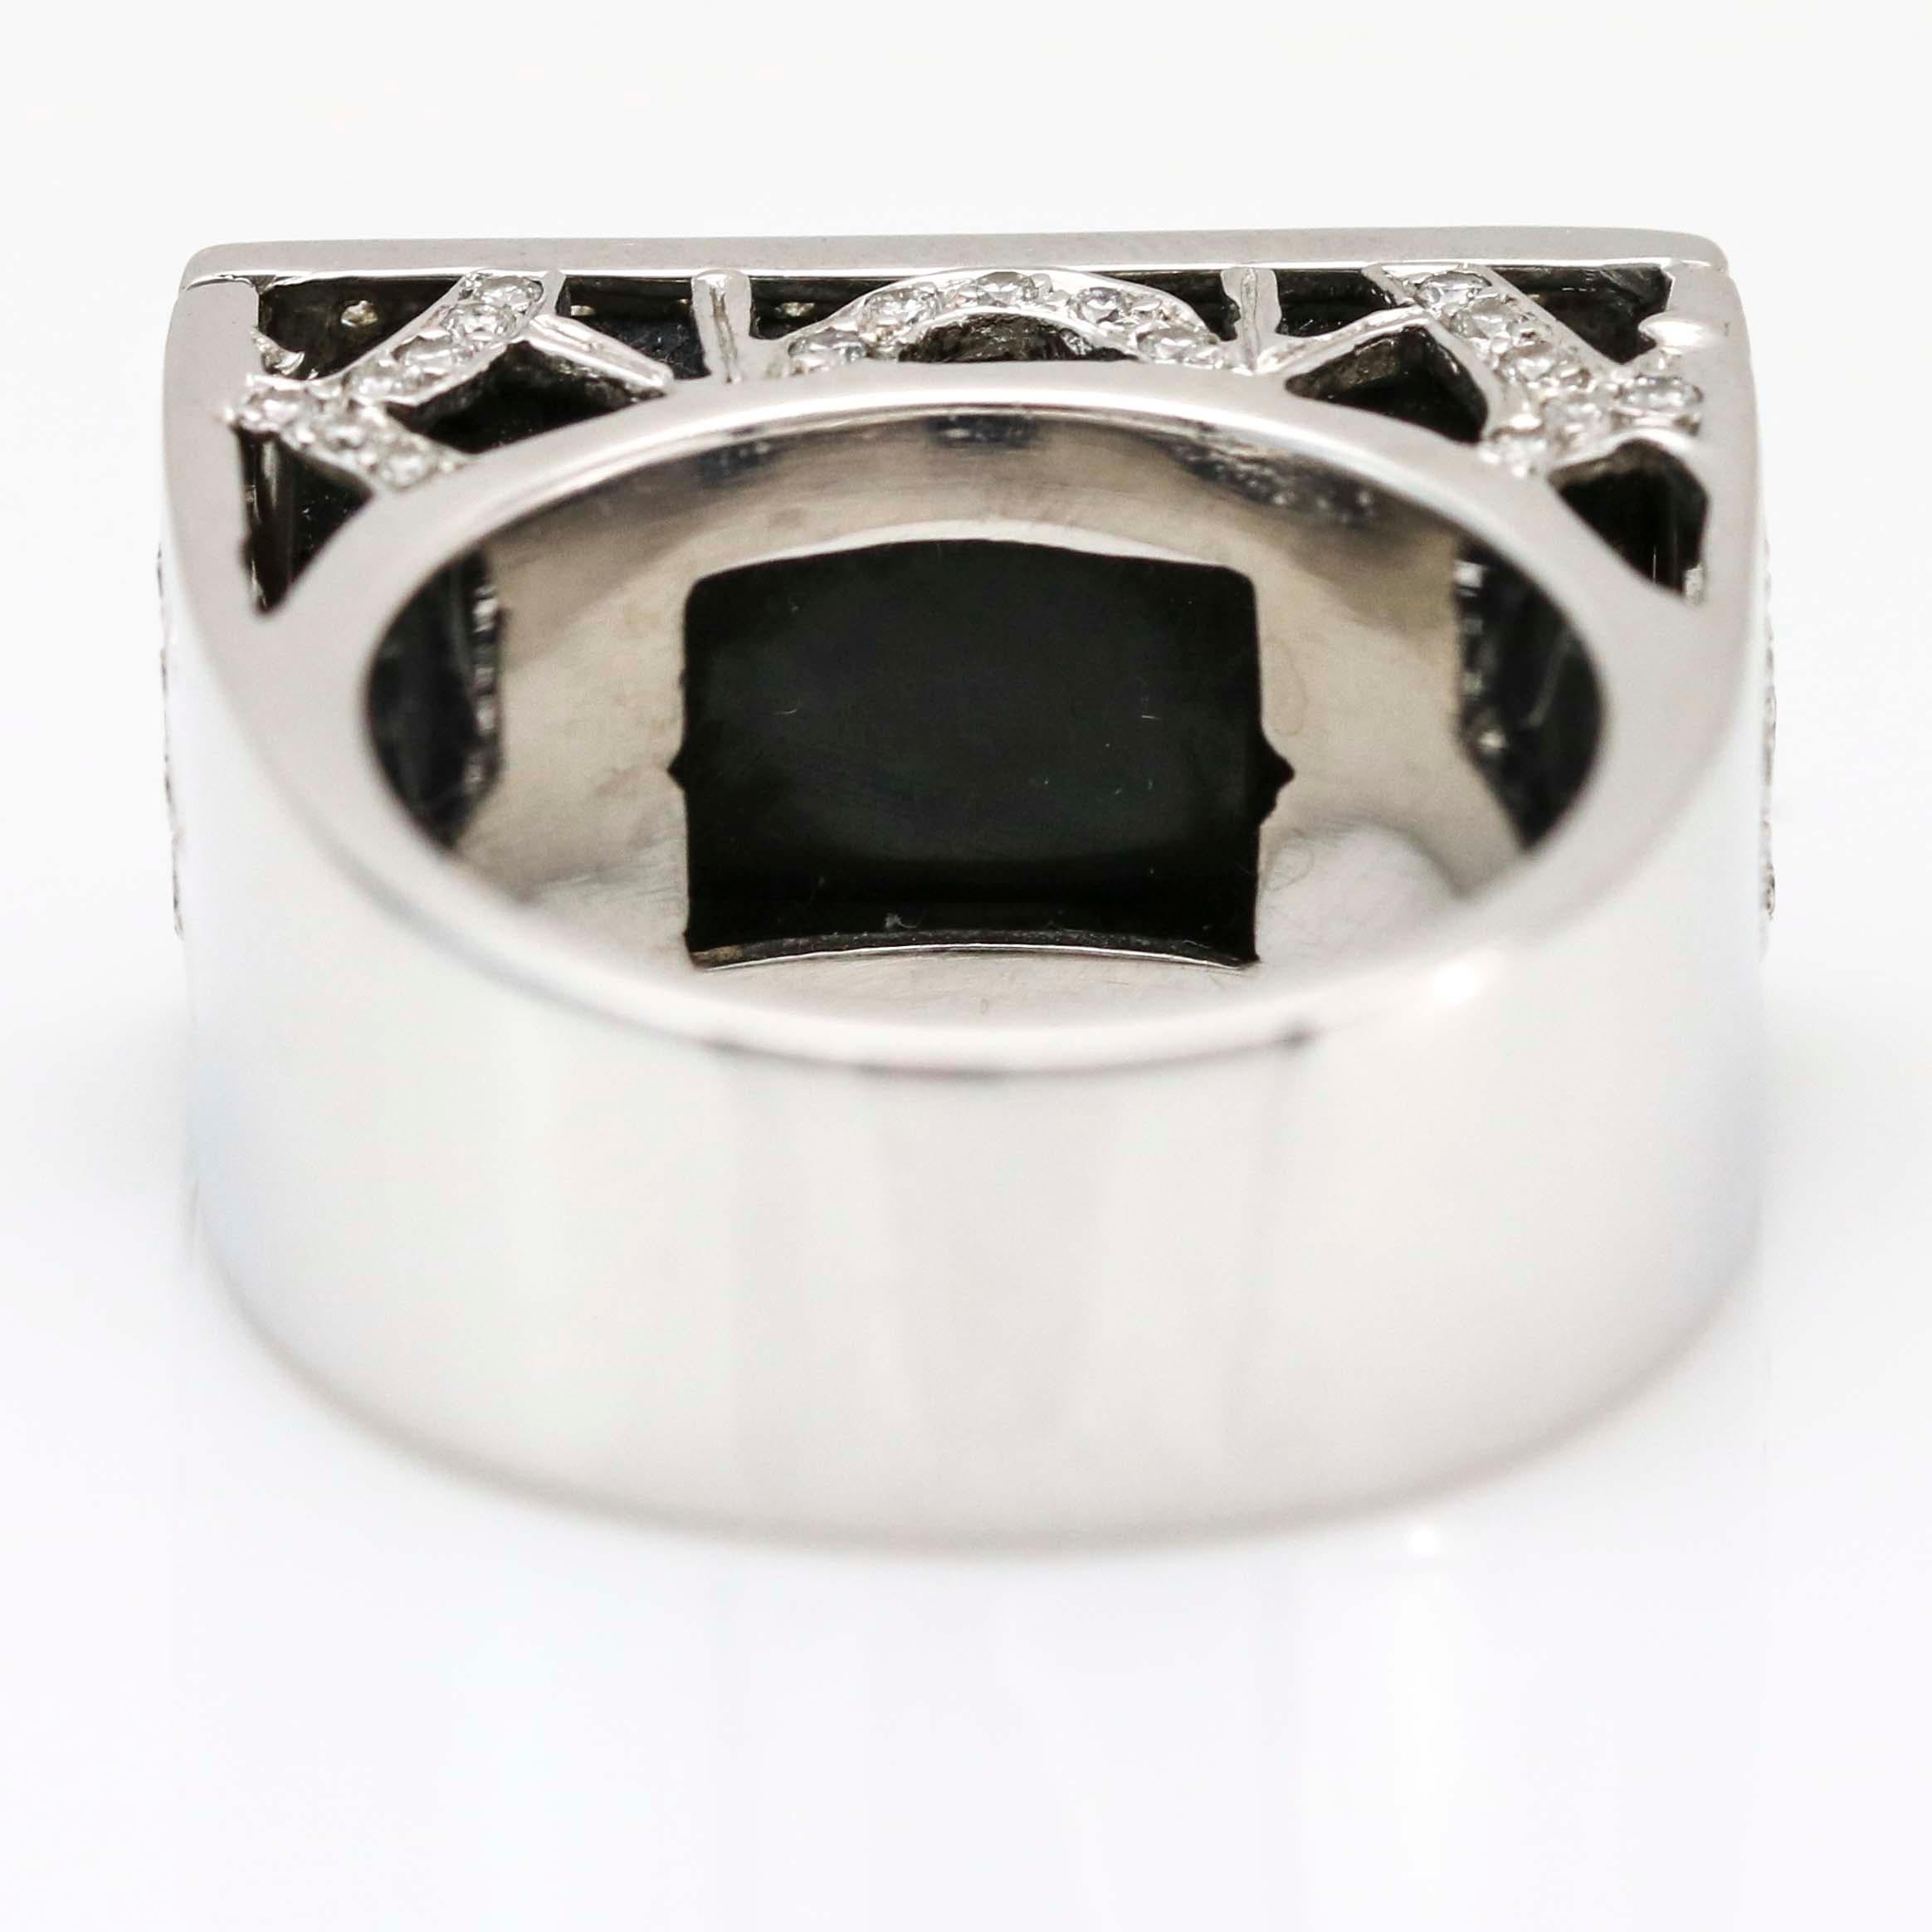 Rectangular Black Onyx 18 Karat White Gold Ring with Diamonds In Good Condition For Sale In Fort Lauderdale, FL